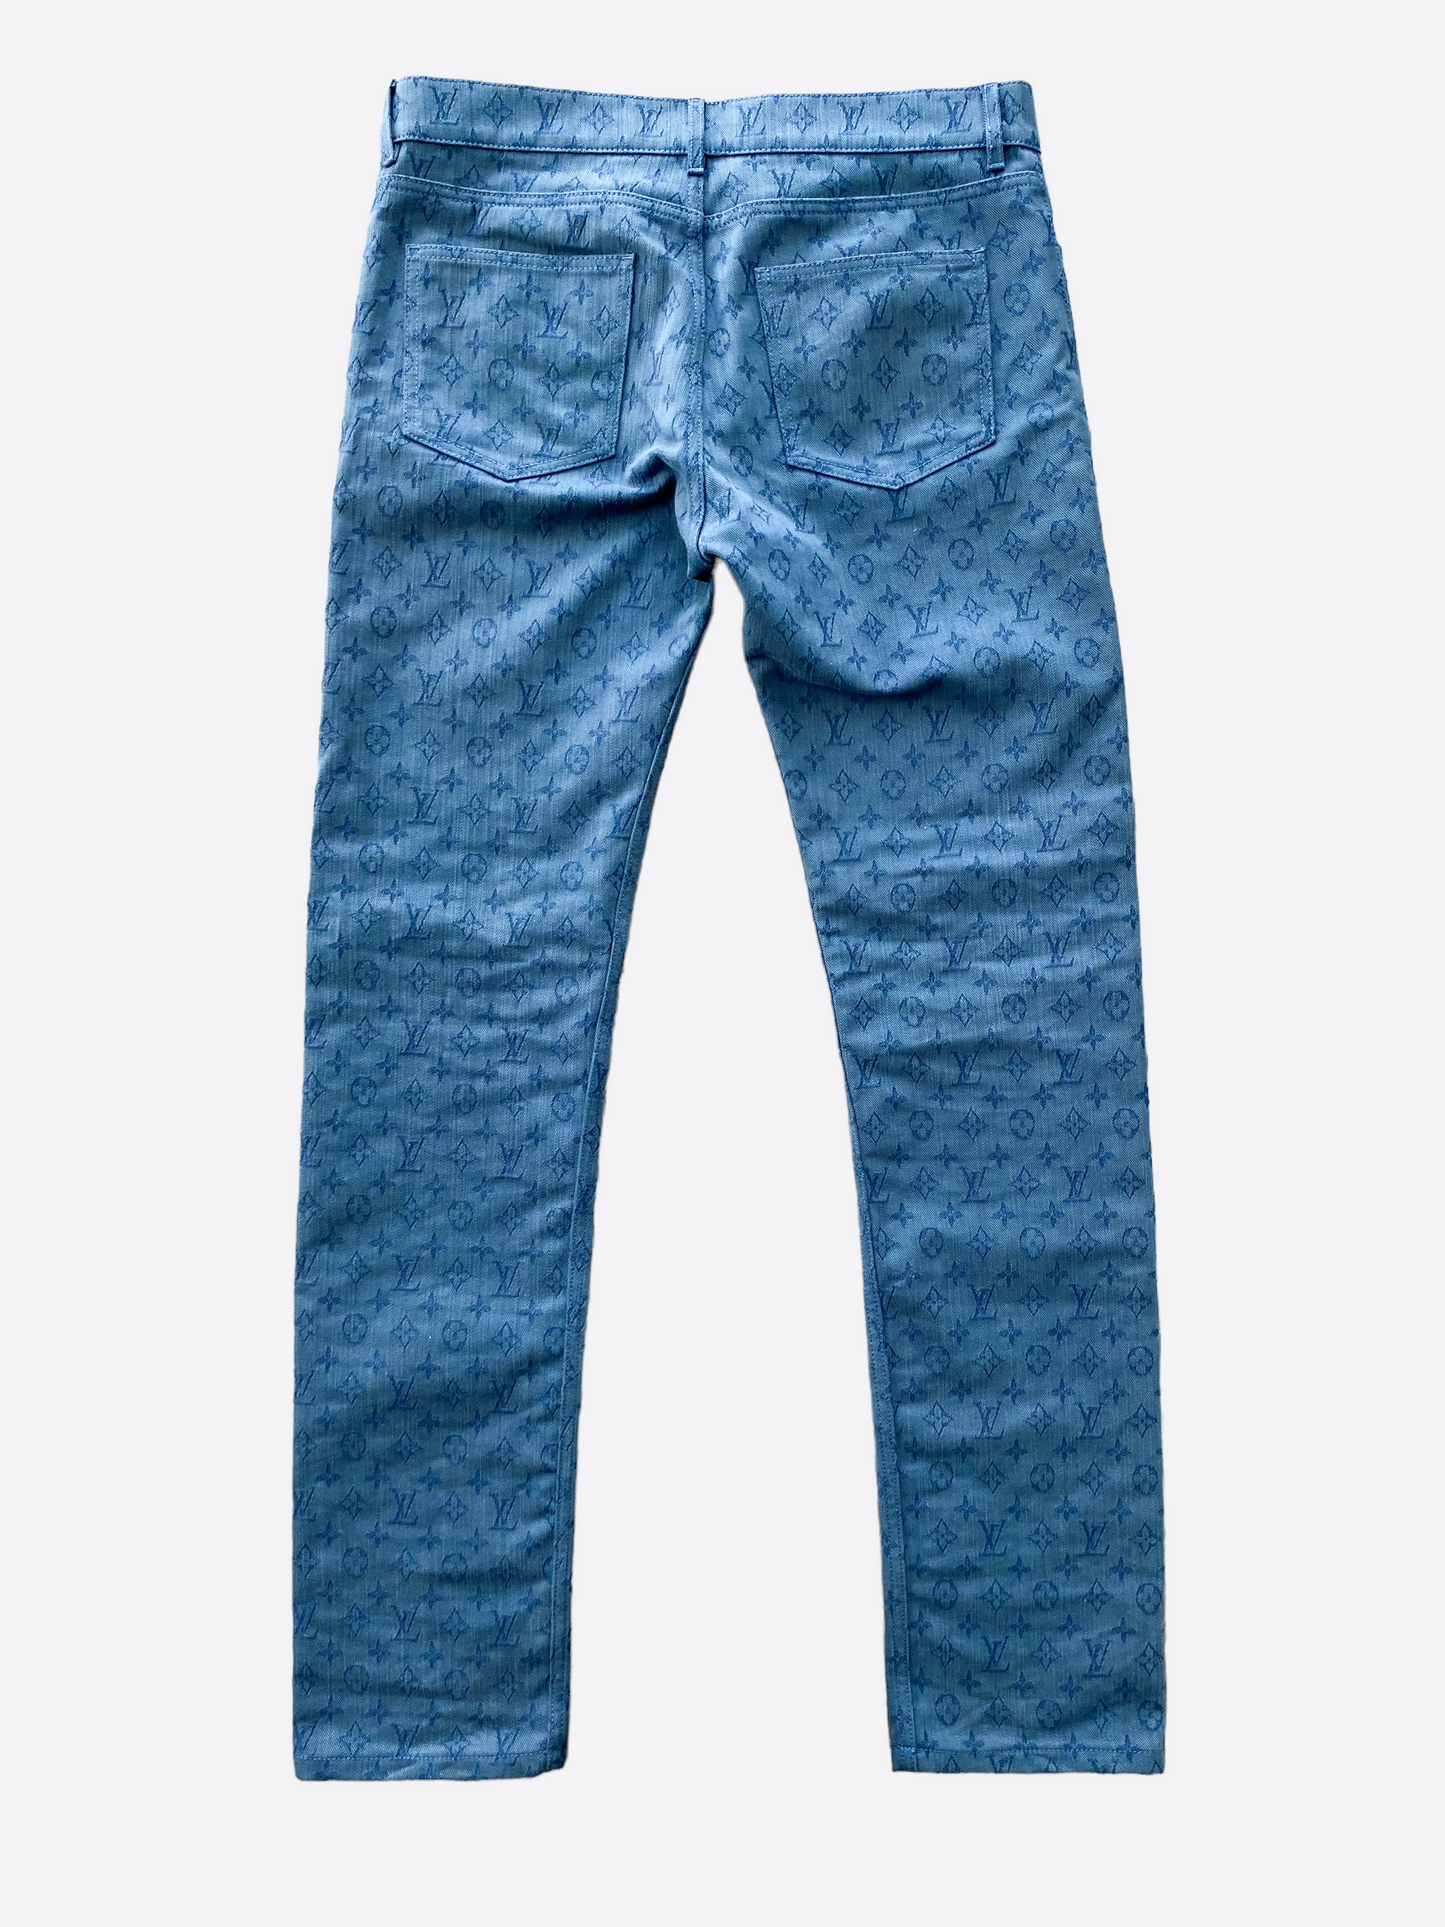 Louis Vuitton Monogram Slim Jeans  Size 36 Available For Immediate Sale At  Sotheby's